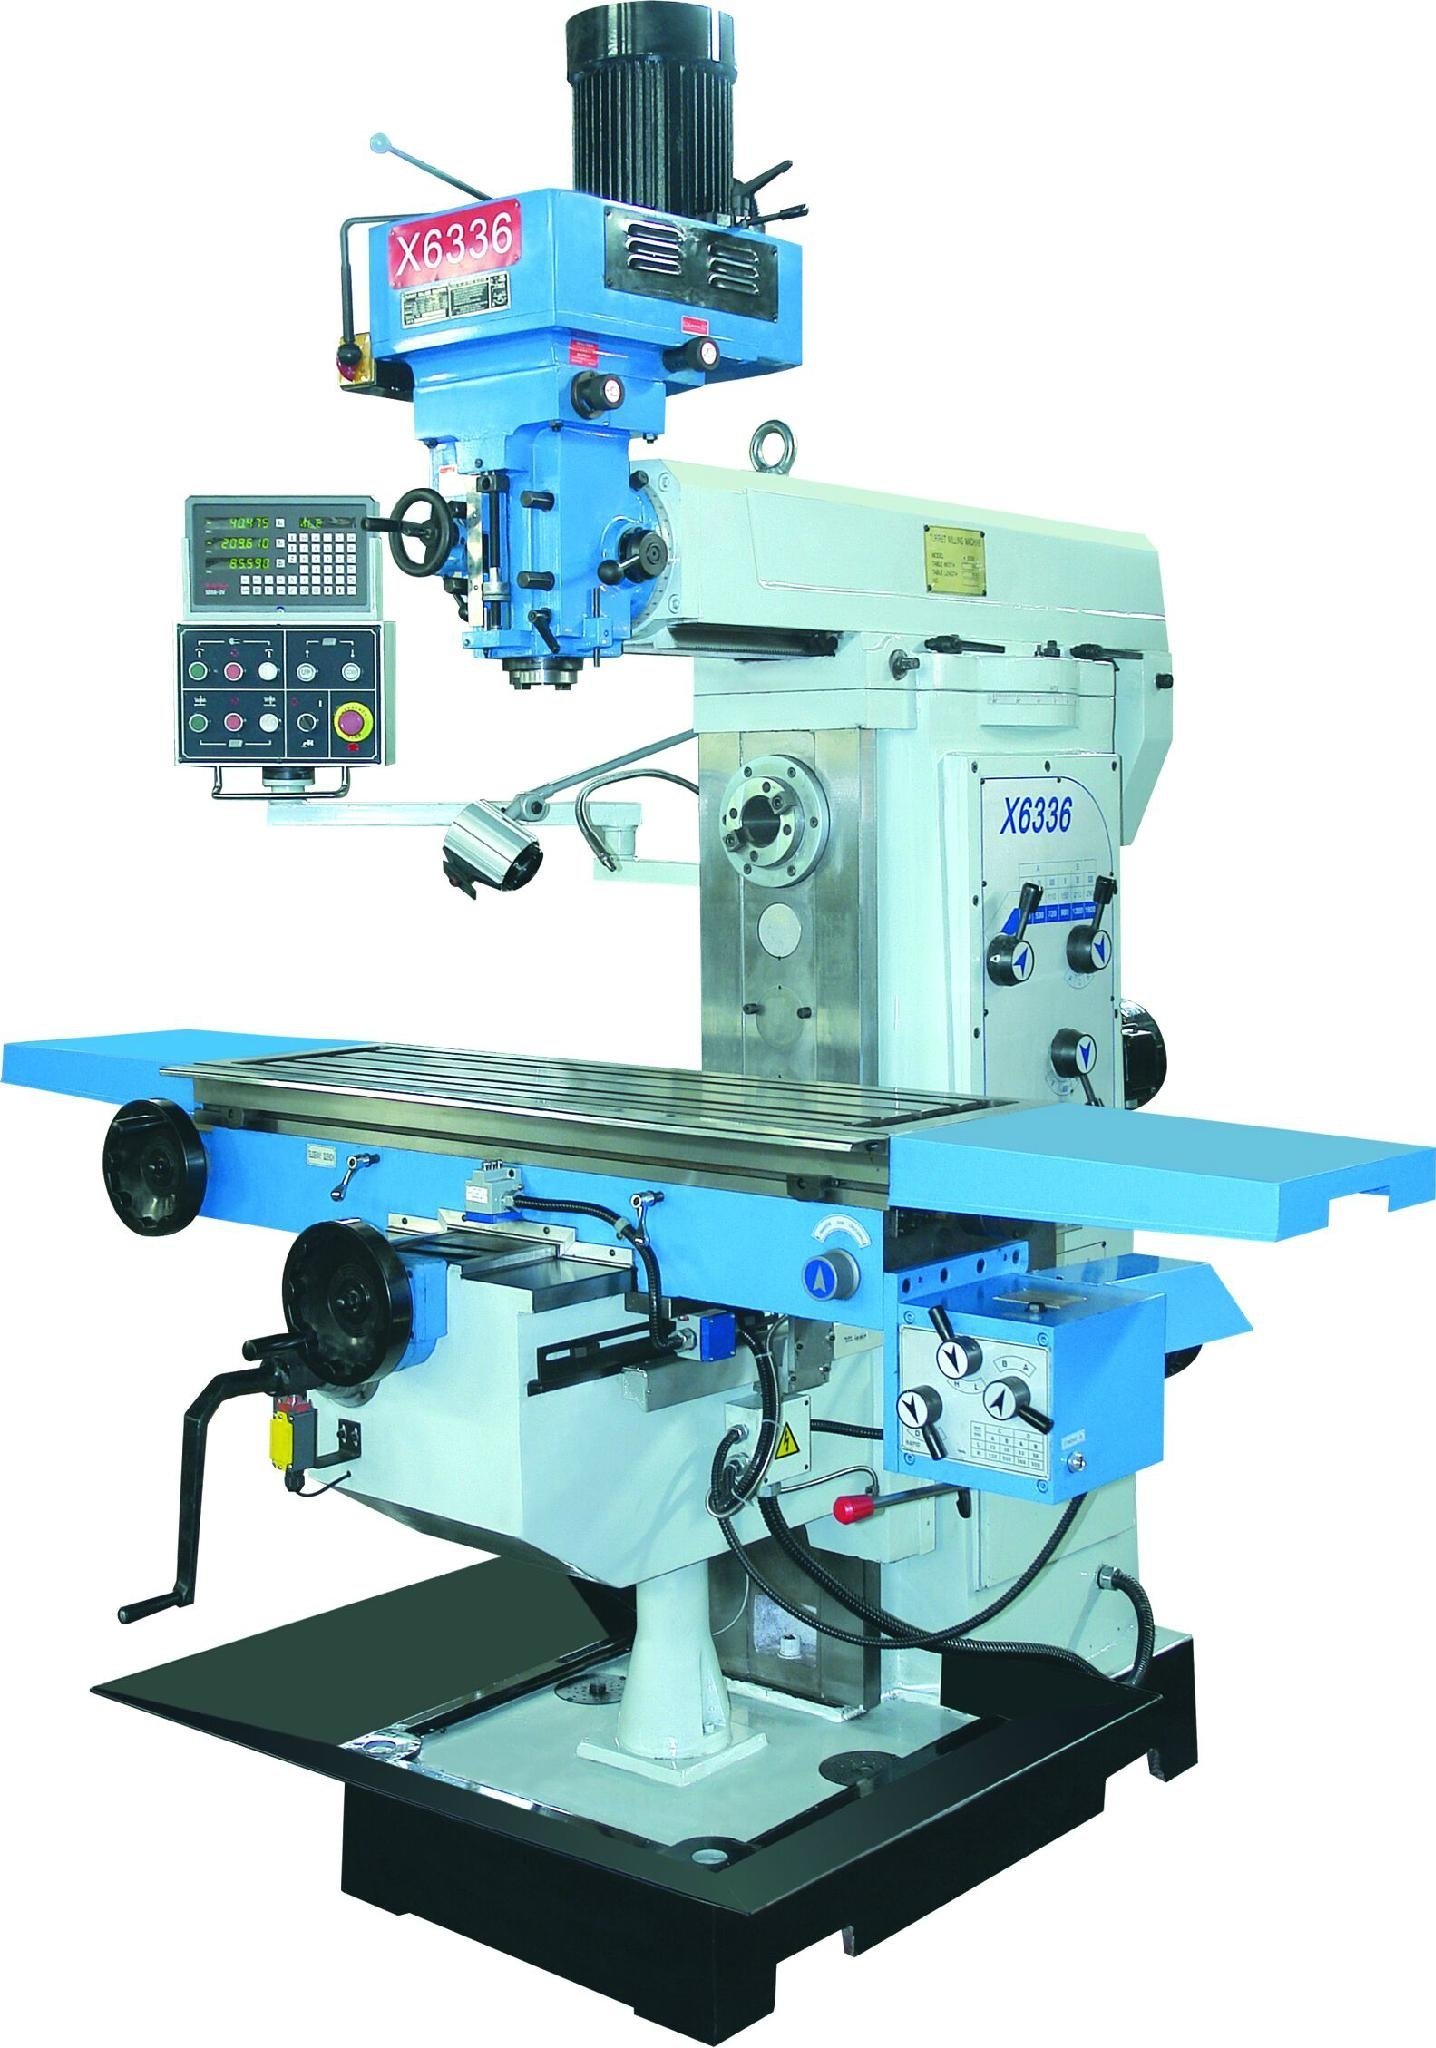 Cheap universal milling machine with DRO at all axies 5